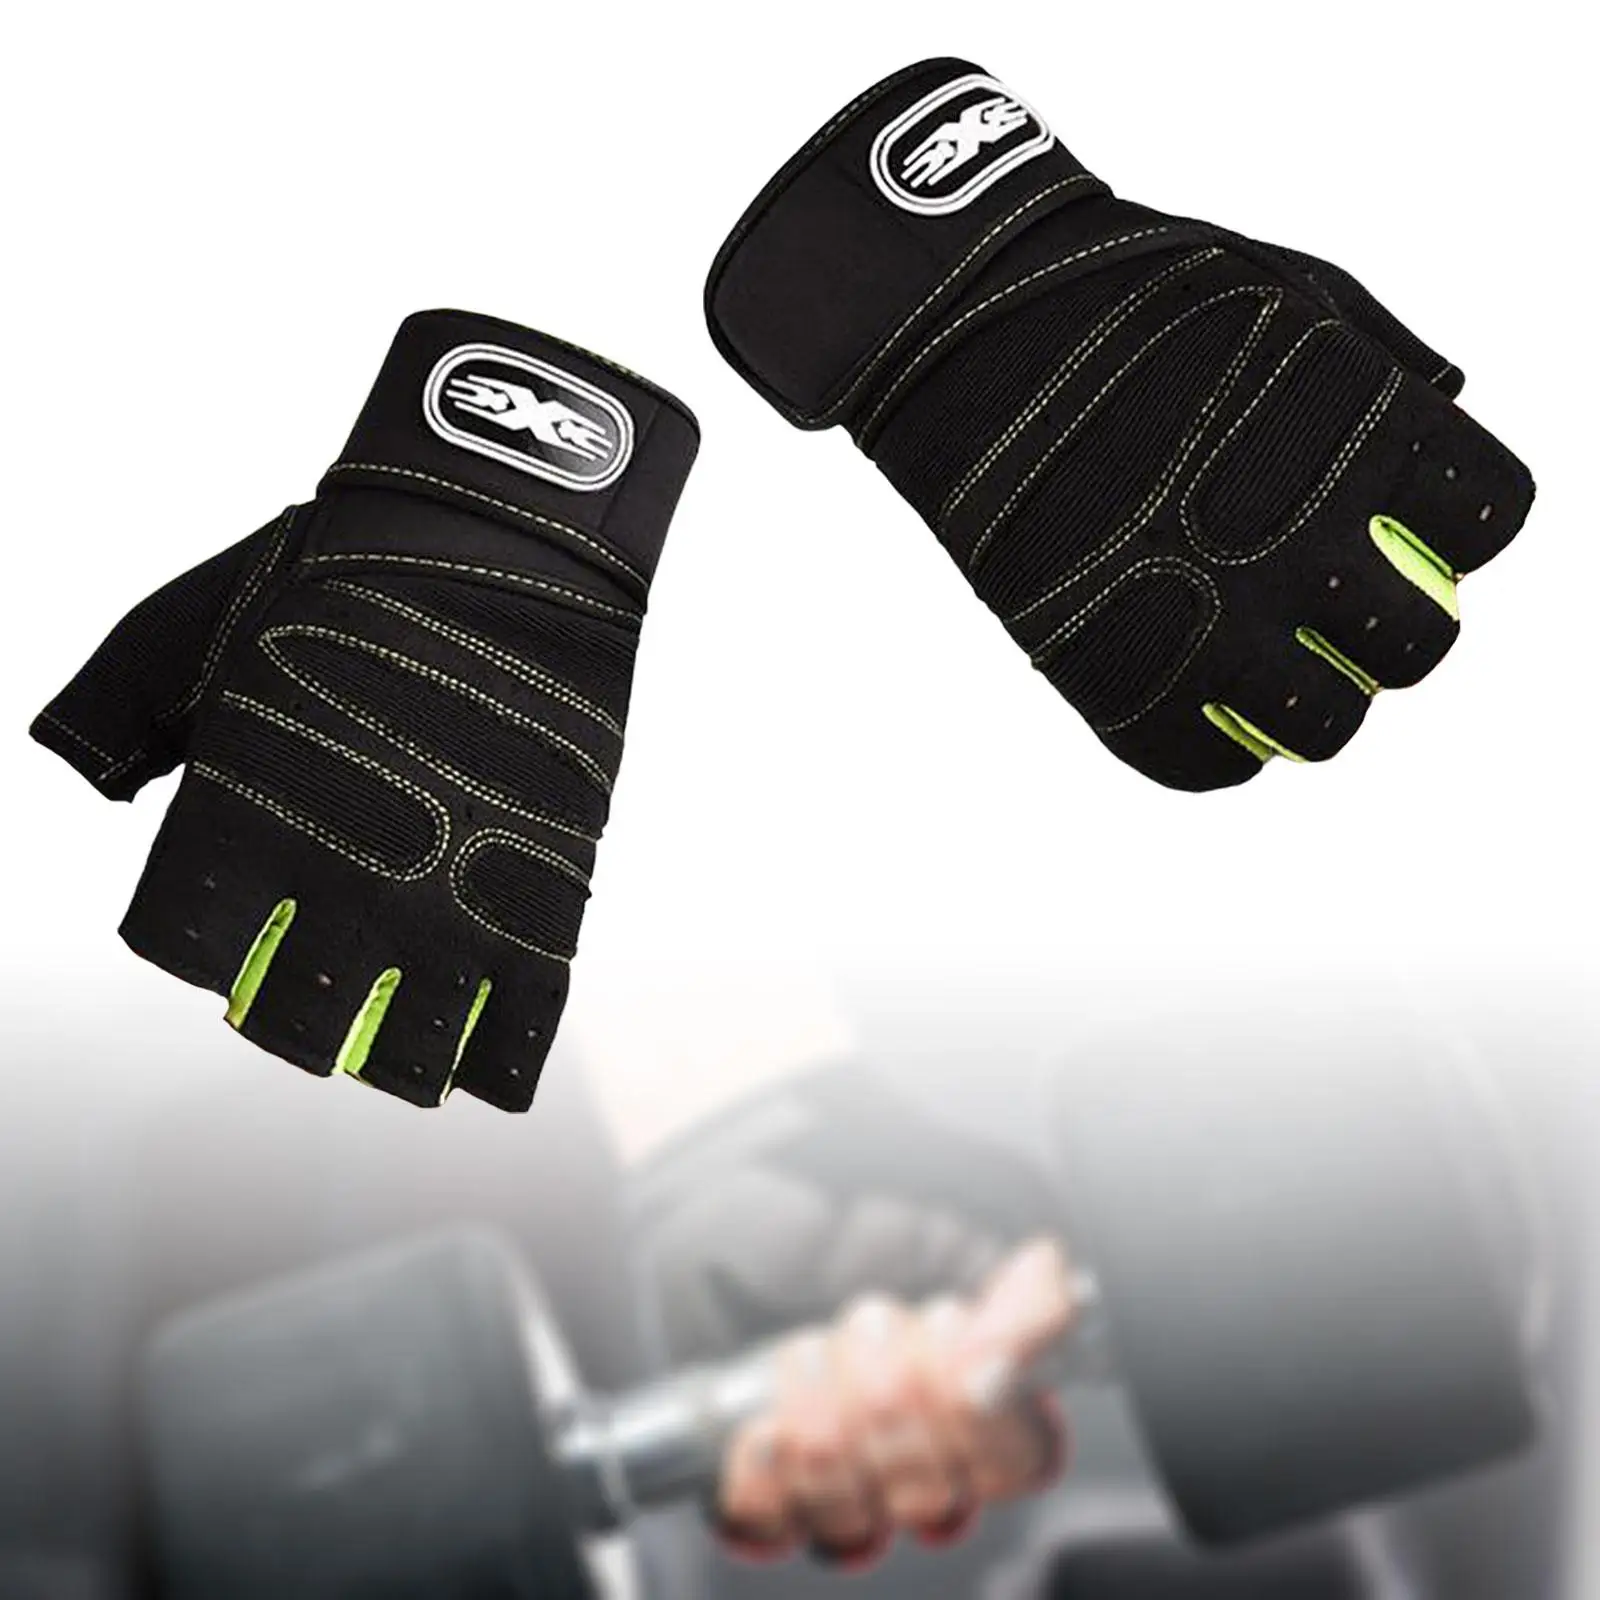 Gym Gloves Wrist Support Deadlift Gloves Weight Lifting Gloves for Sport Equipment Pull Ups Powerlifting Strength Training